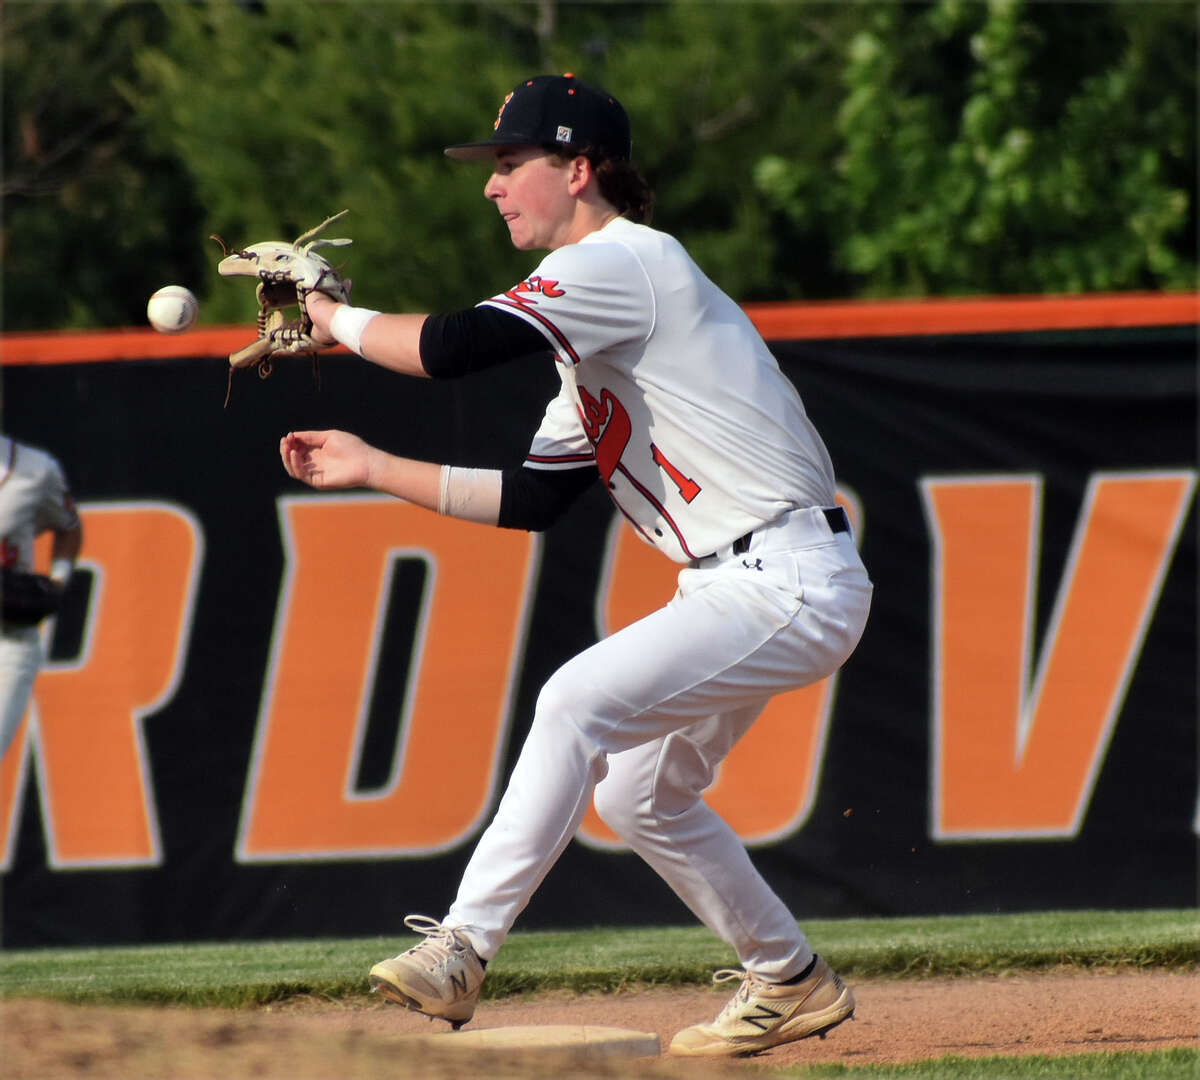 Edwardsville's Cole Funkhouser catches a throw for a force at second against O'Fallon on Tuesday at Tom Pile Field in Edwardsville.